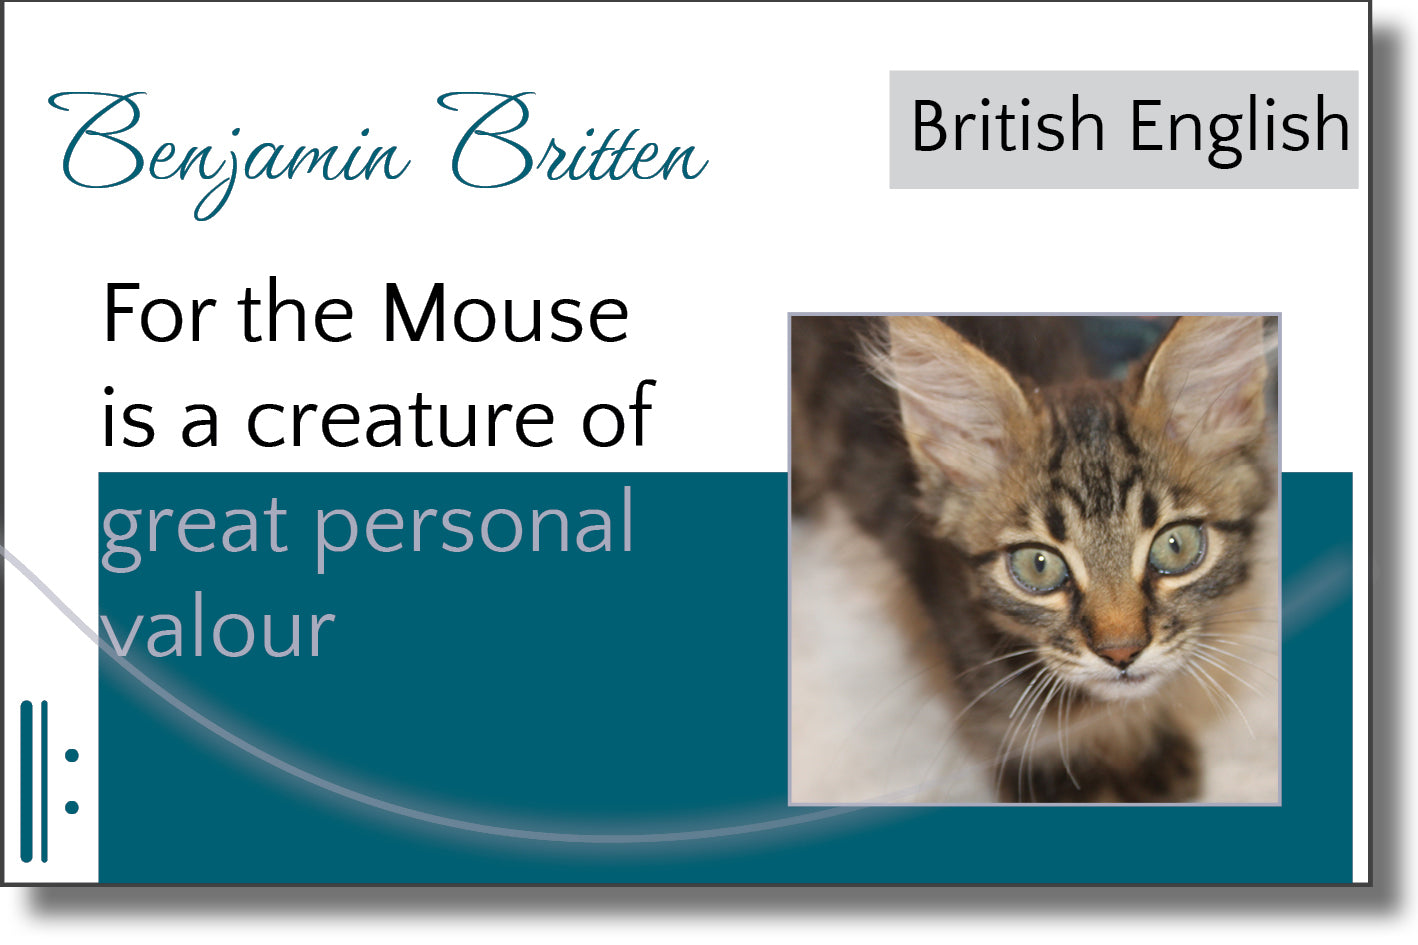 Britten - For the Mouse is a creature of great personal valour